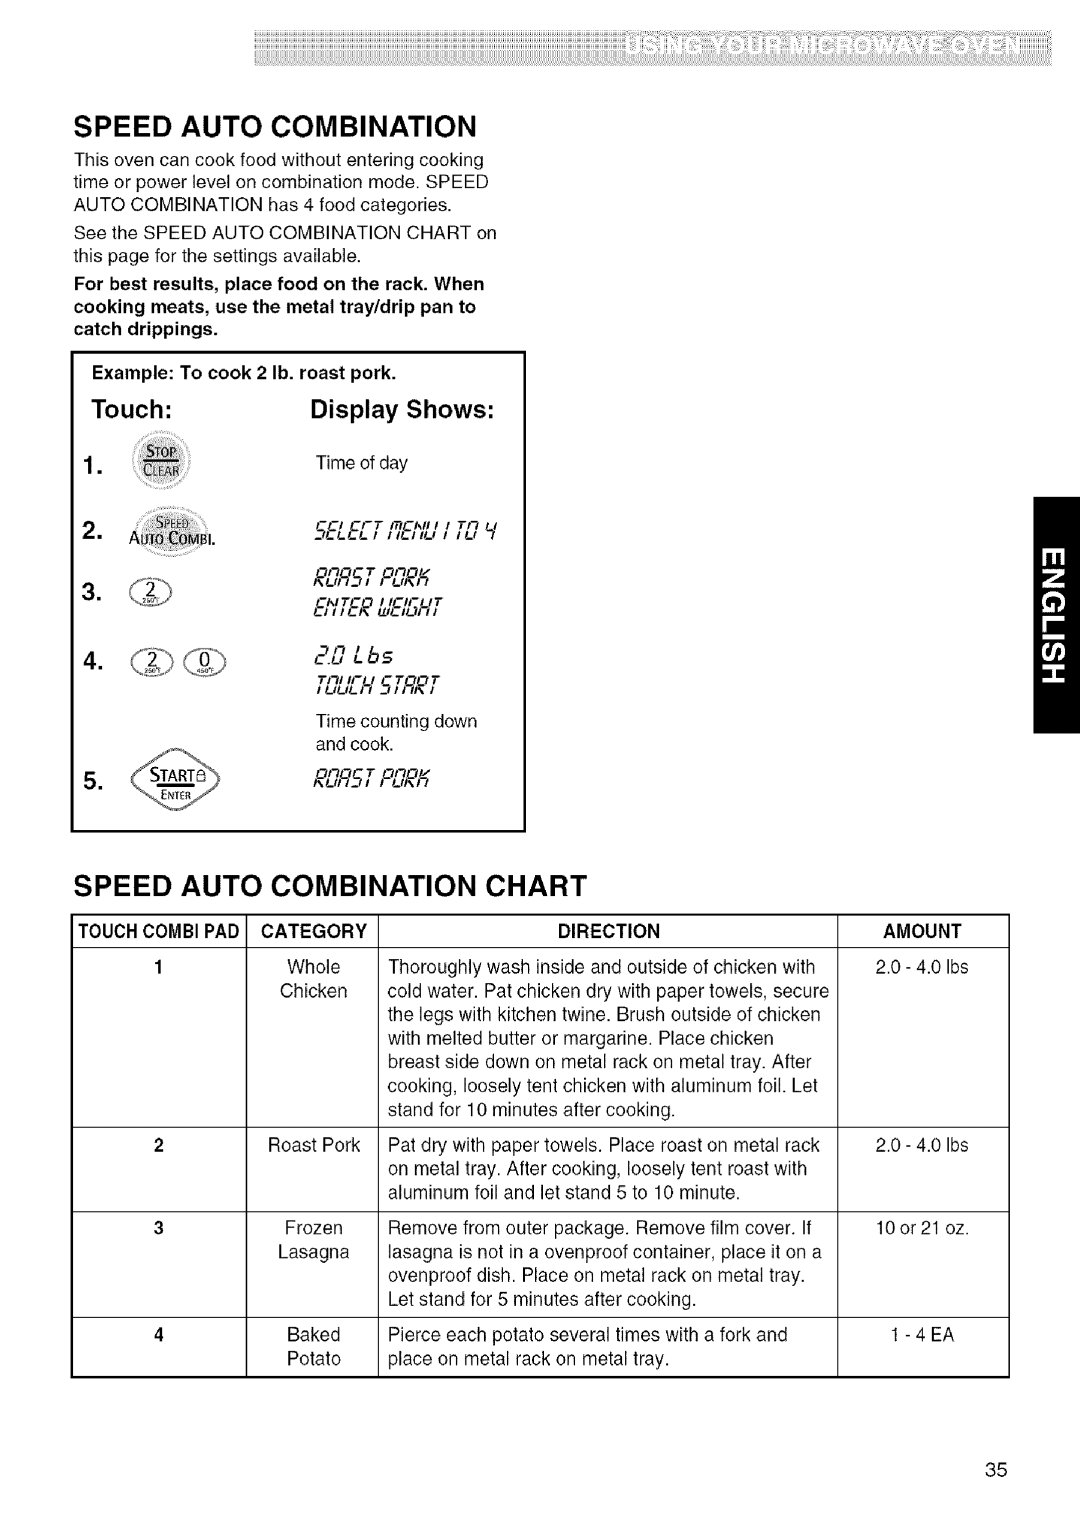 Kenmore 721.80829, 721.80824, 721.80823 Speed Auto Combination Chart, Touchcombipad Category, Display Shows, Amount 